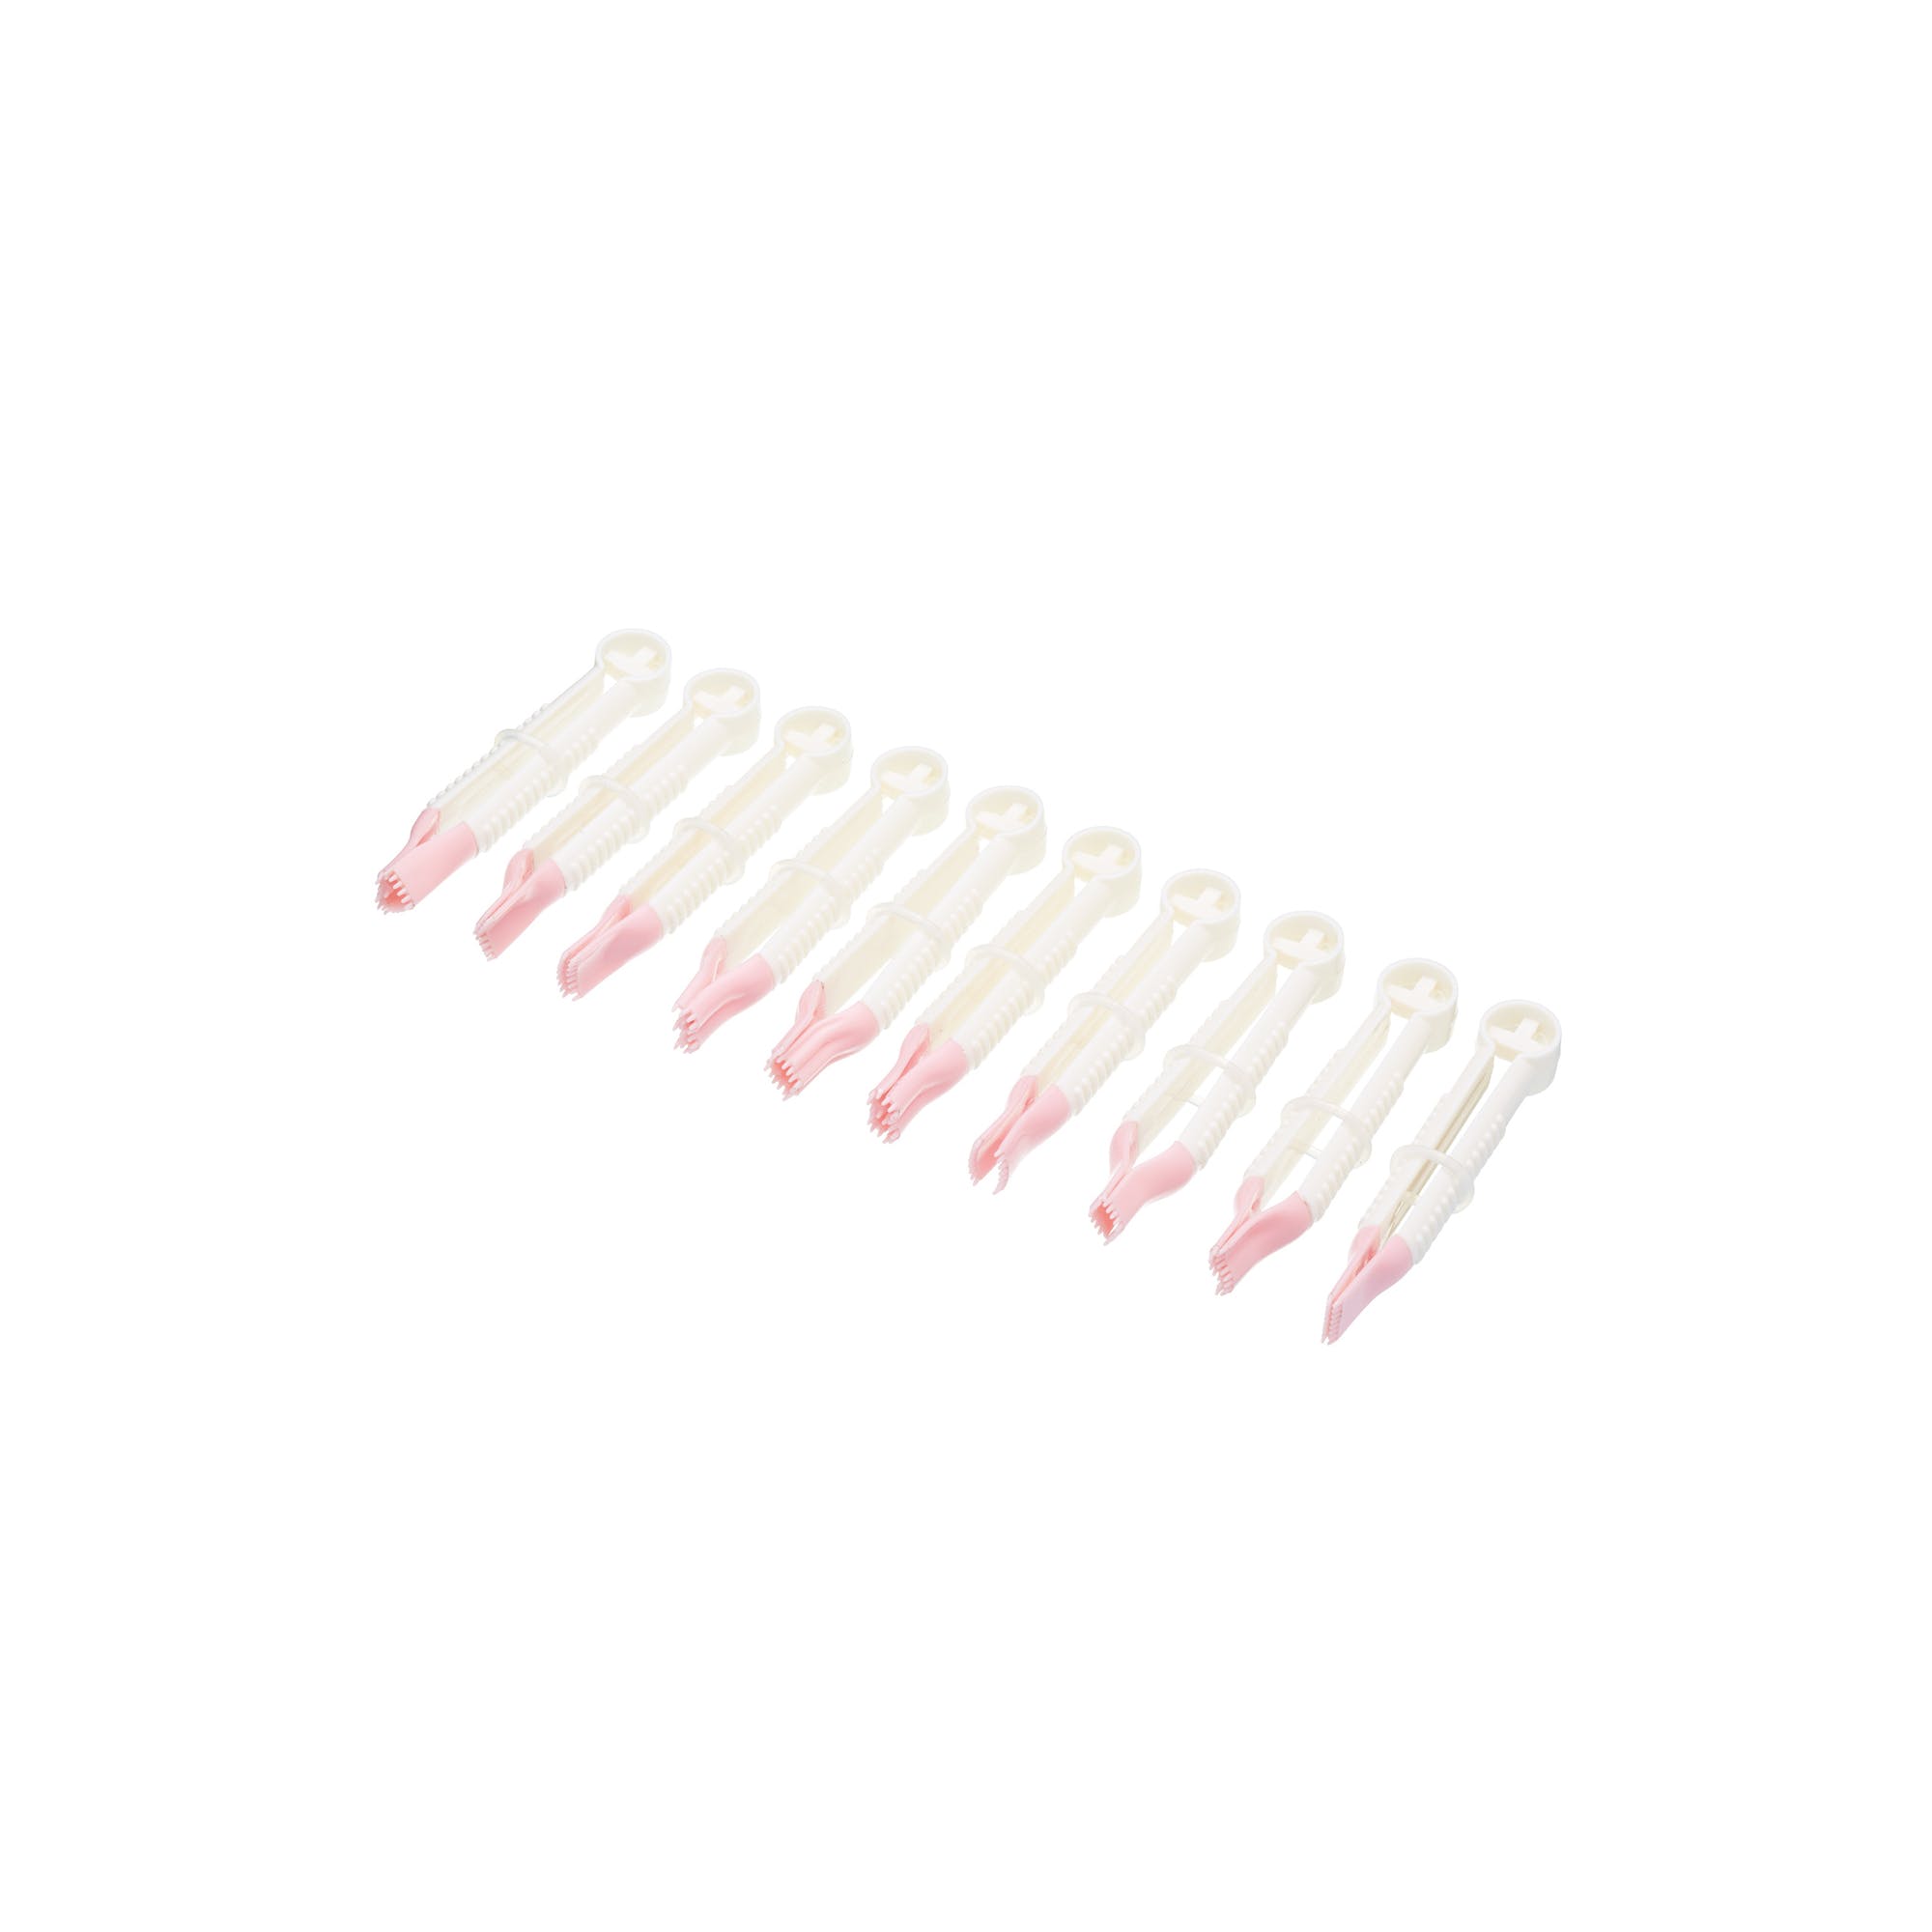 Sweetly Does It Dimple Edged Fondant Crimper Set - The Cooks Cupboard Ltd